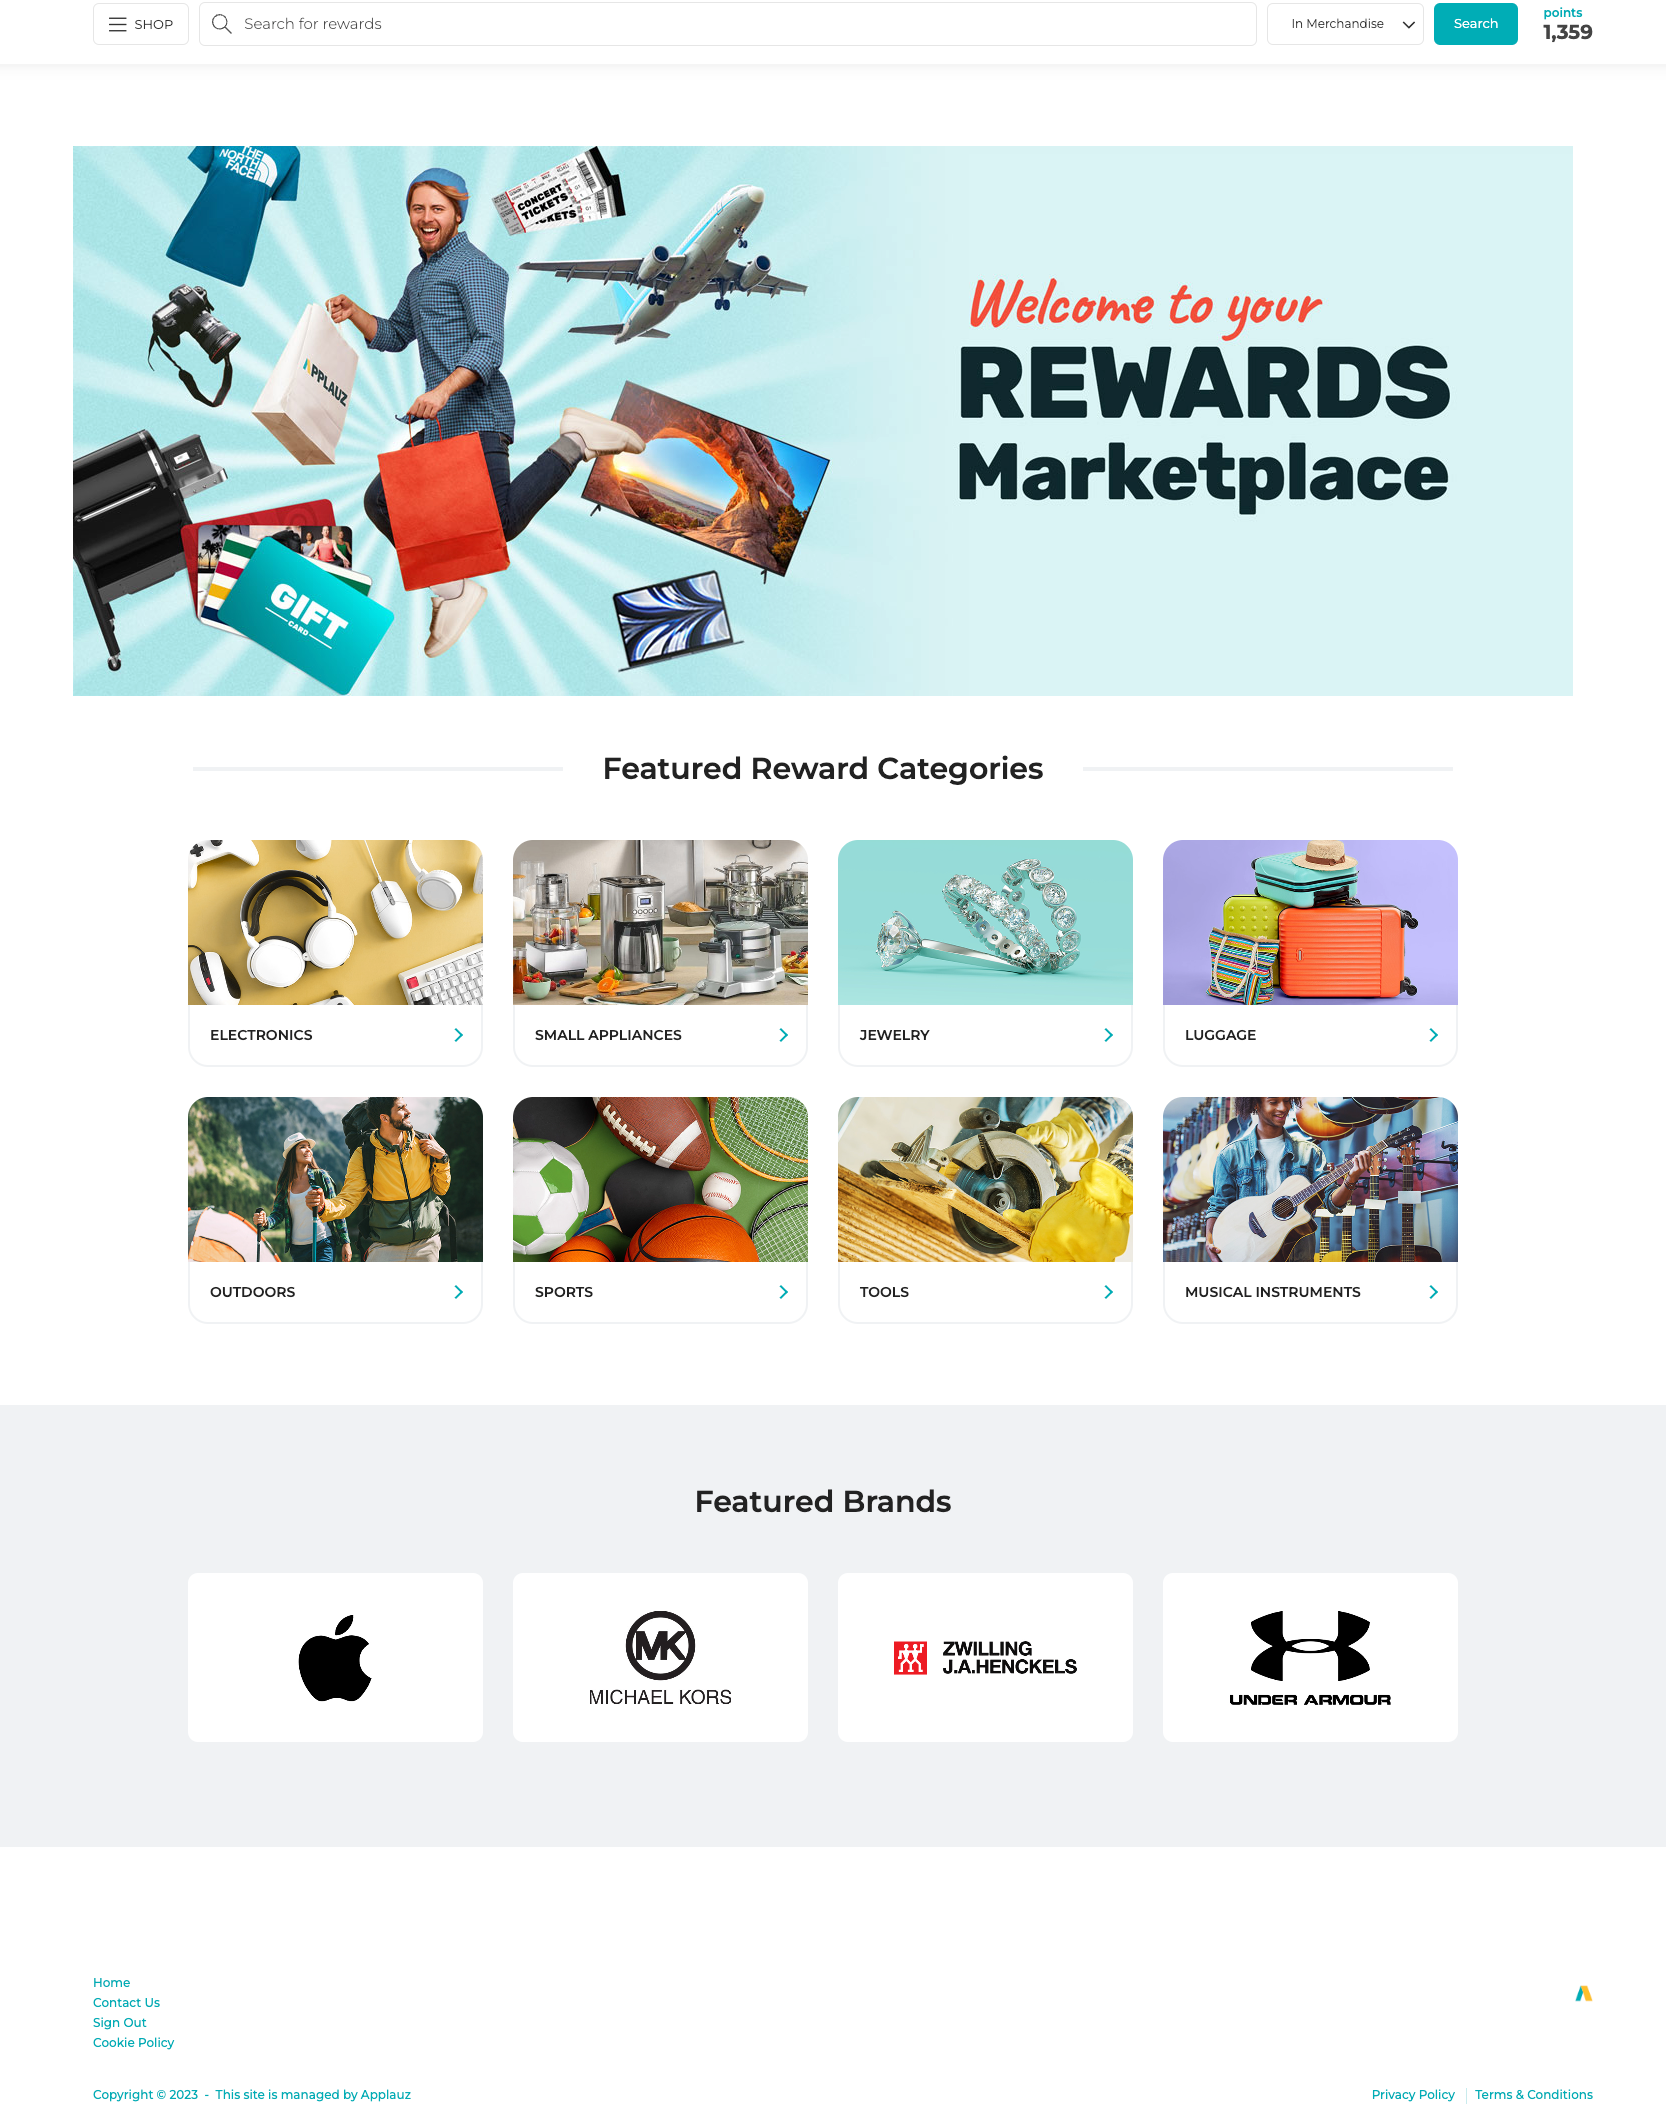 Applauz Recognition Software - Applauz Rewards Marketplace - Earn redeemable recognition points you can use to shop the rewards marketplace.